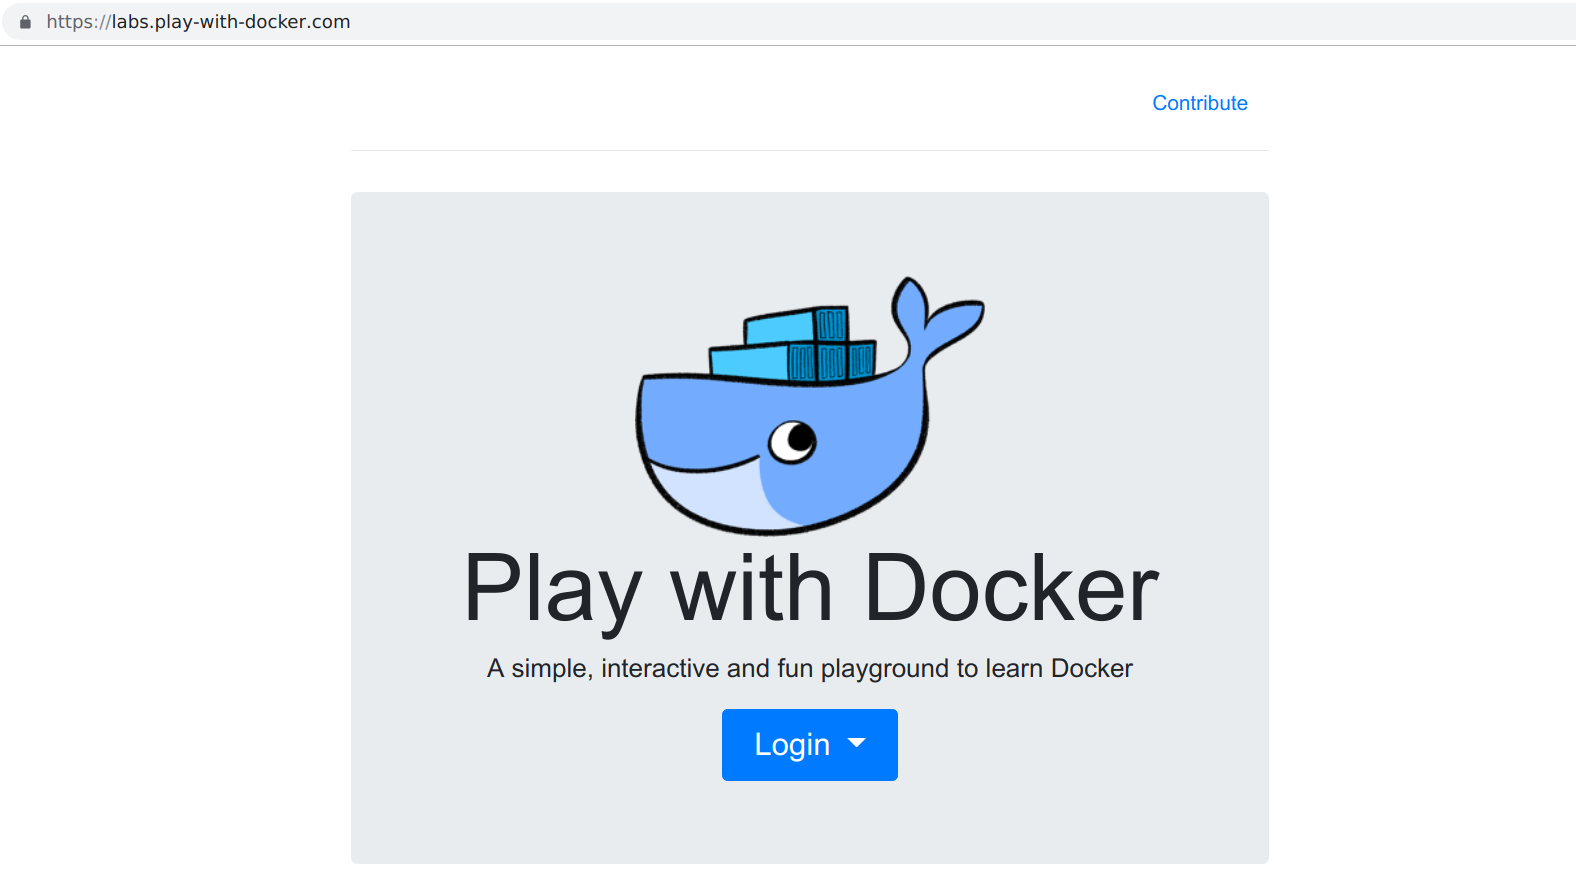 Play with Docker